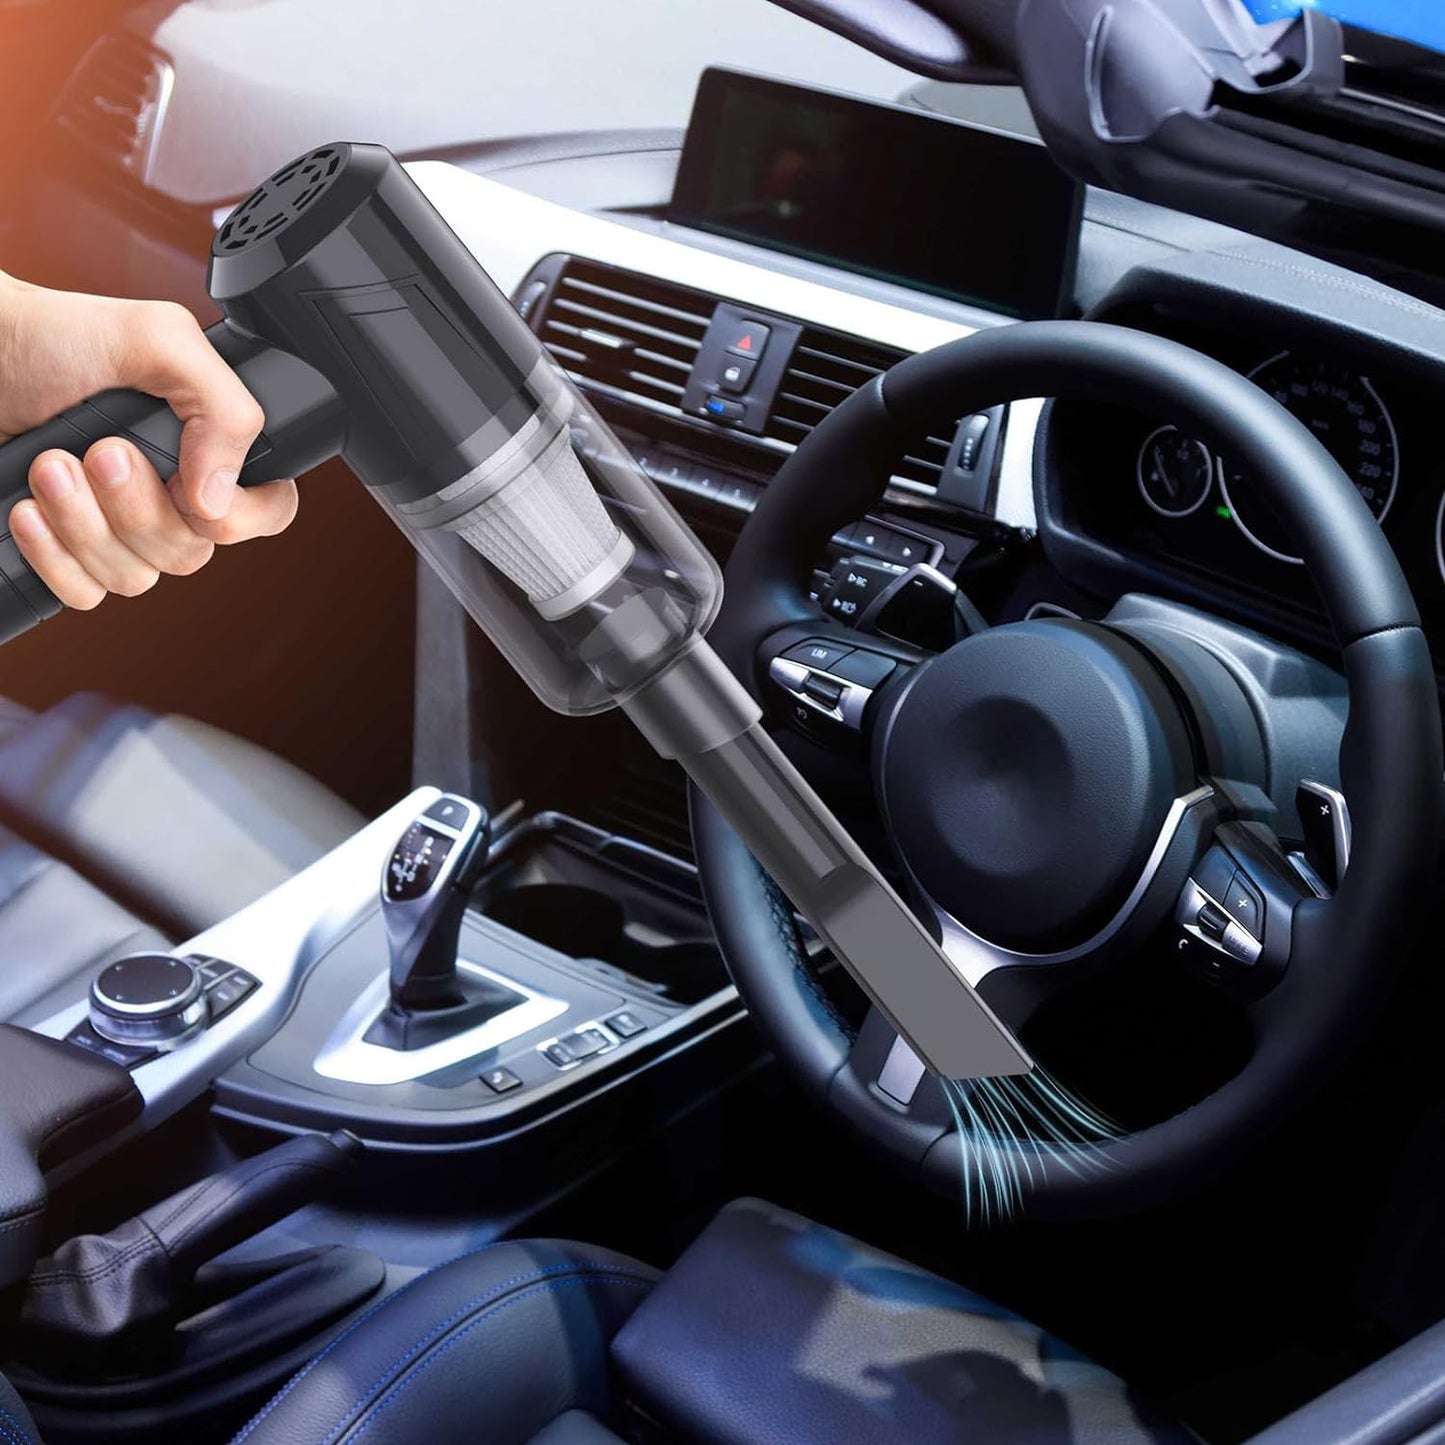 Vacuum Cleaner For Car Home Cleaning Cordless, Rechargeable 2 In 1  18000PA Suction  Lightweight Portable Black.